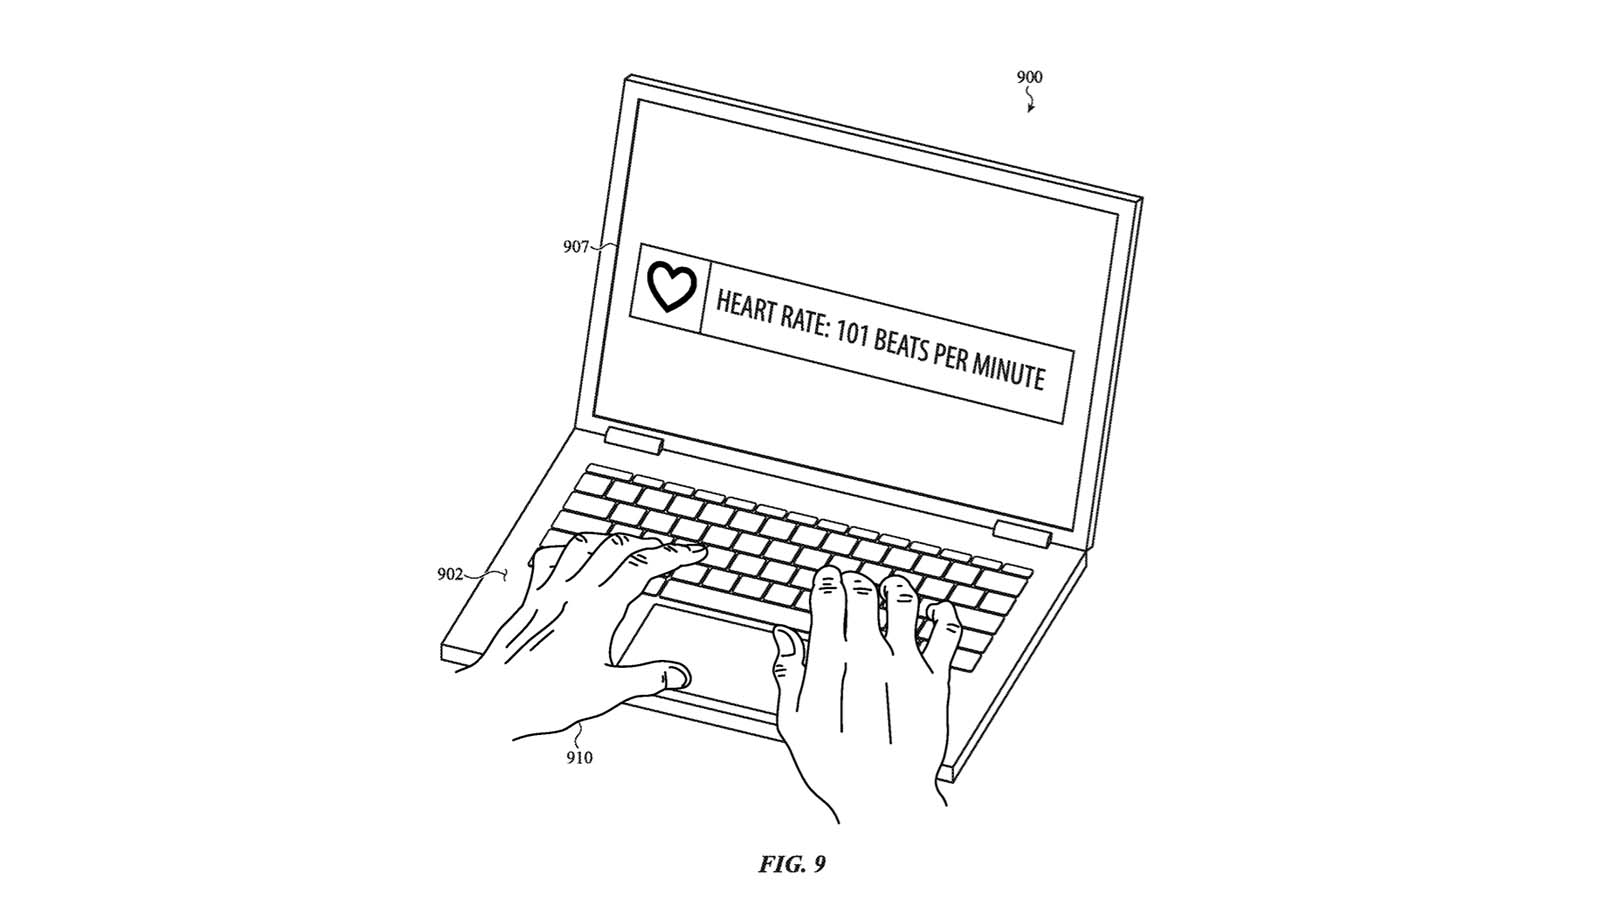 Apple Patent Drawings Showing A Heartrate Sensor In The Palm Rest Of A MacBook